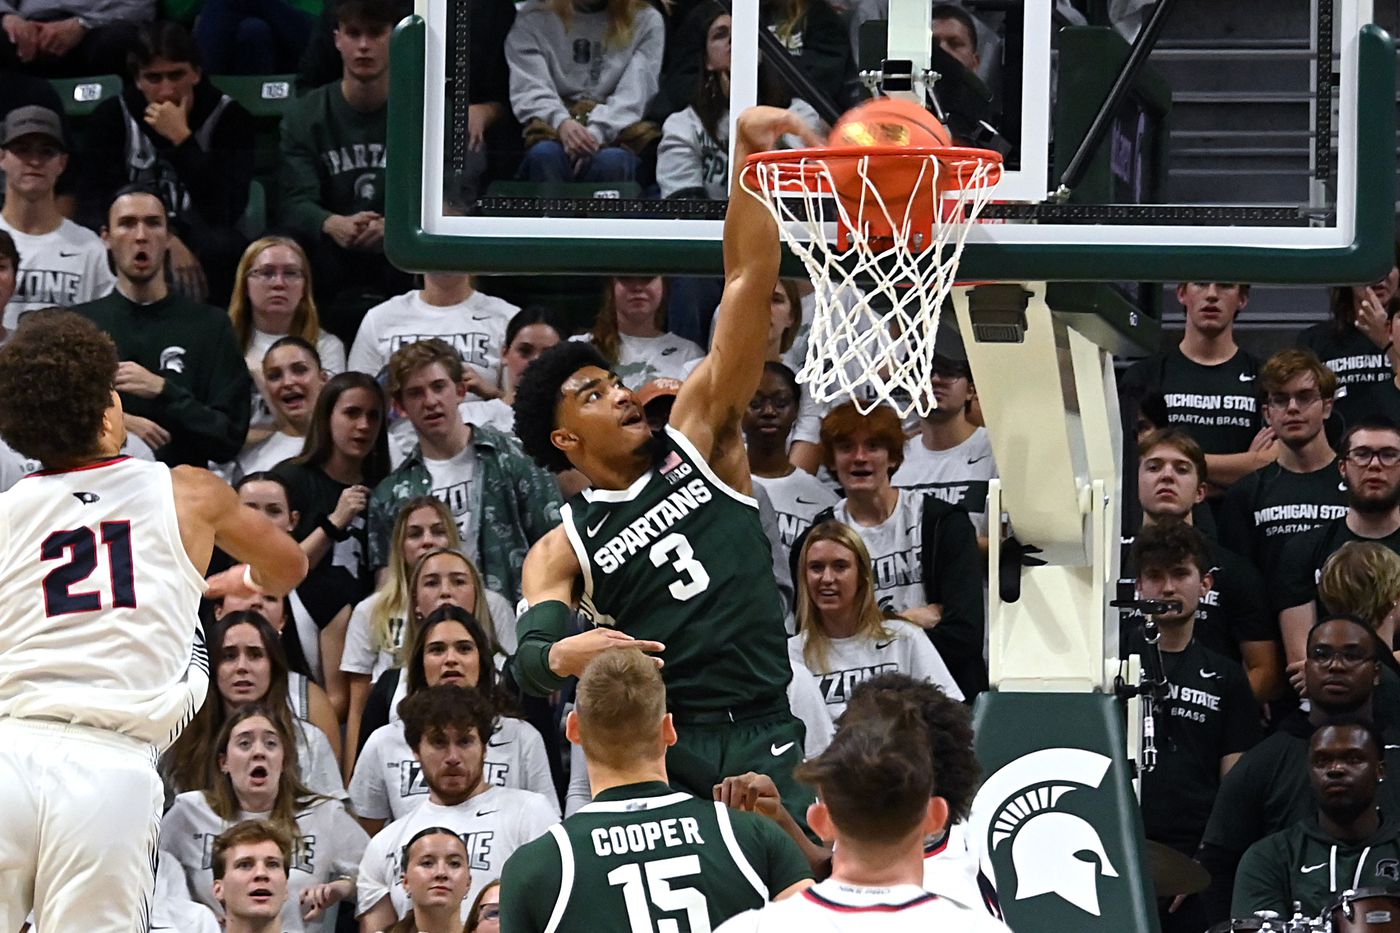 Michigan State uses raw talent to beat Southern Indiana – 3 points